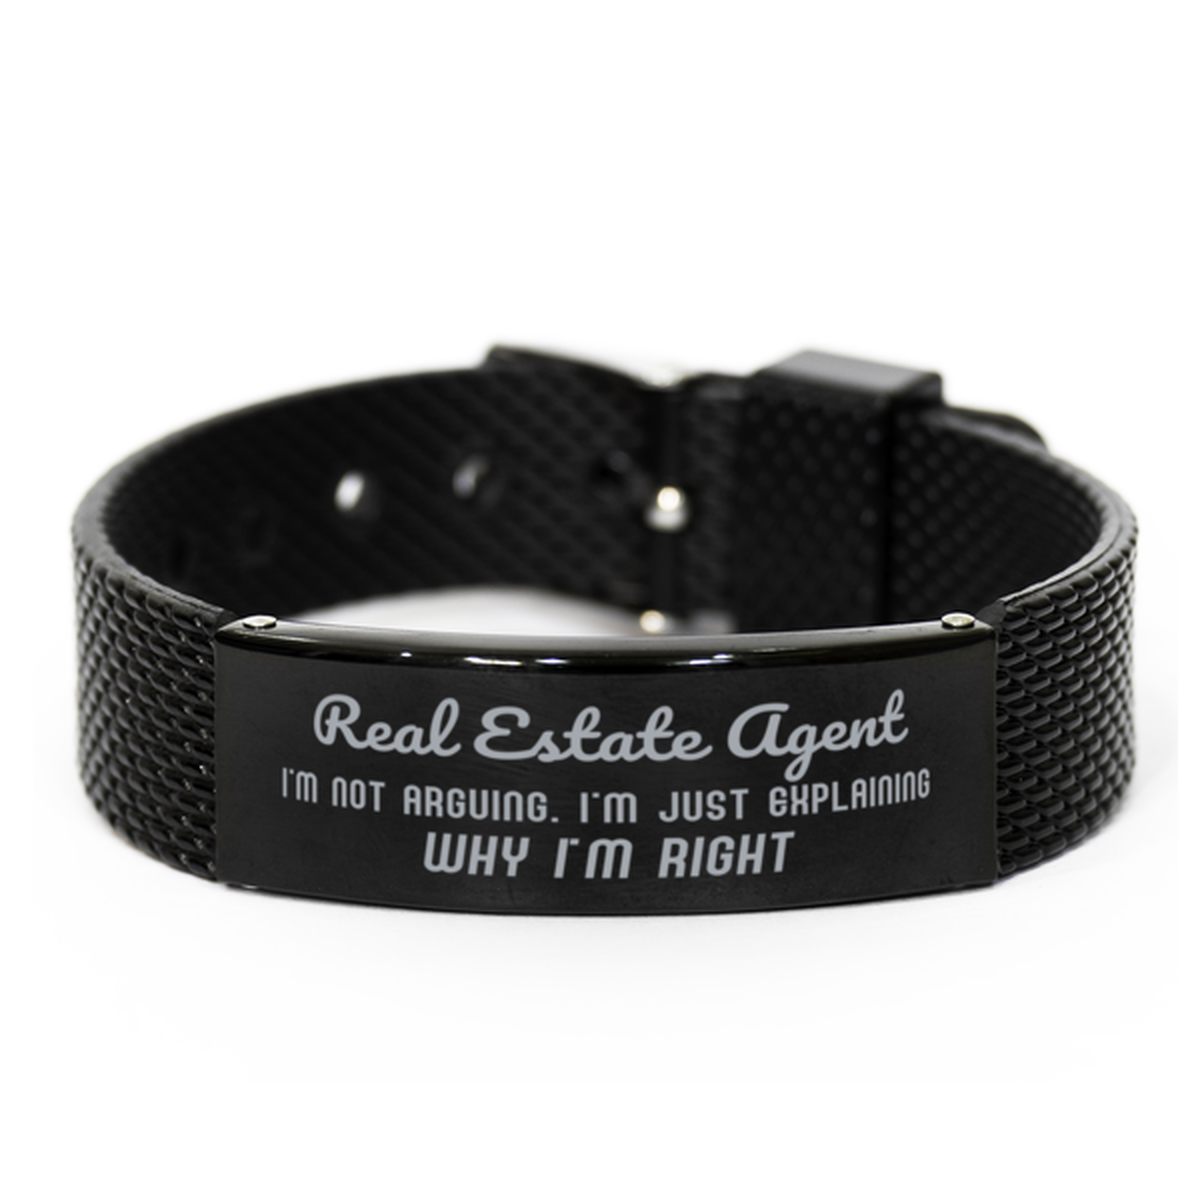 Real Estate Agent I'm not Arguing. I'm Just Explaining Why I'm RIGHT Black Shark Mesh Bracelet, Funny Saying Quote Real Estate Agent Gifts For Real Estate Agent Graduation Birthday Christmas Gifts for Men Women Coworker